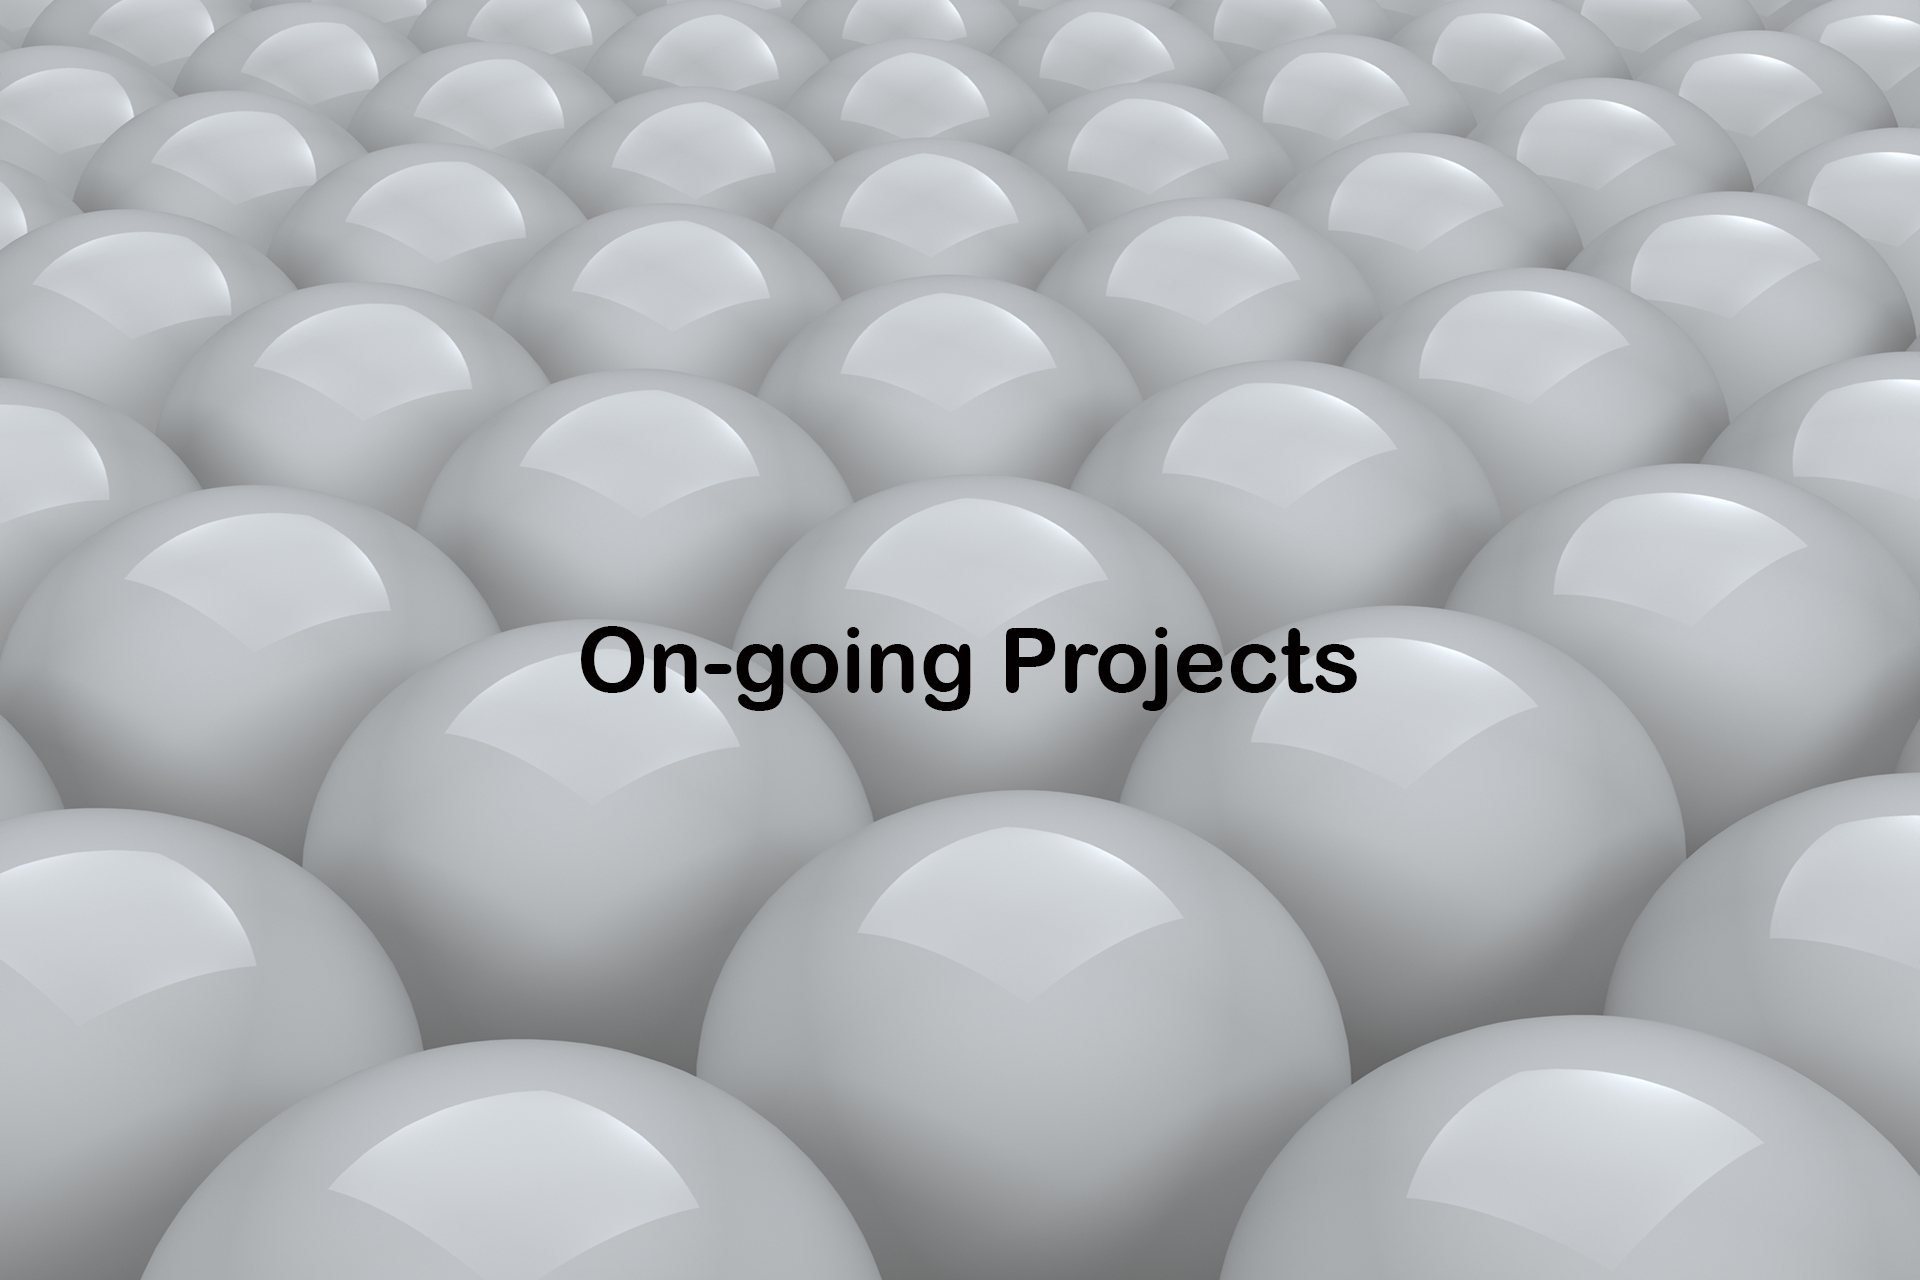 On-going Projects